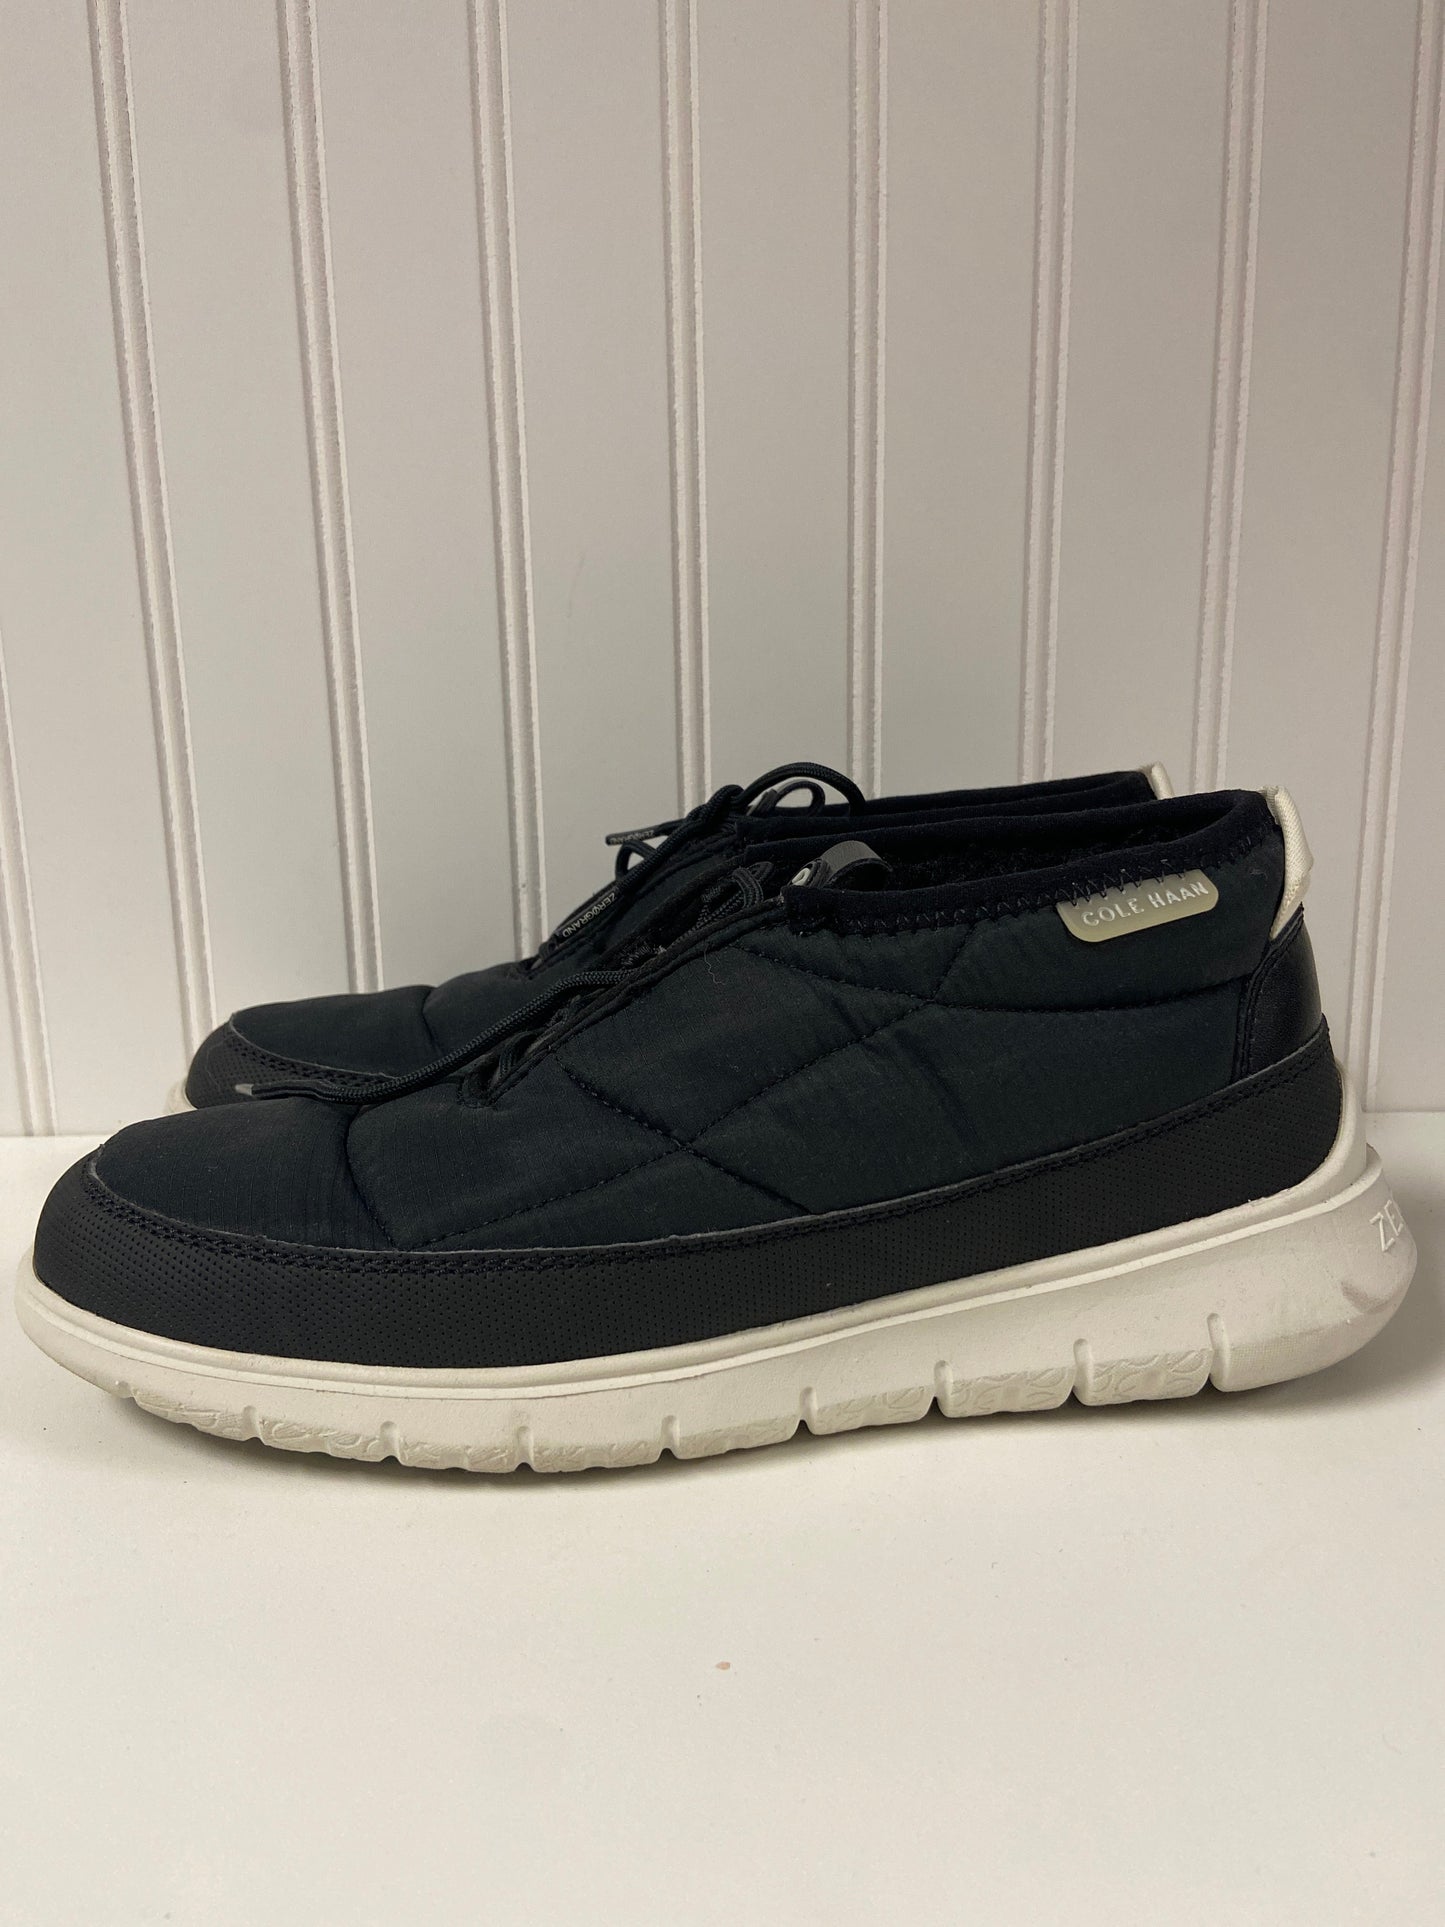 Shoes Athletic By Cole-haan  Size: 8